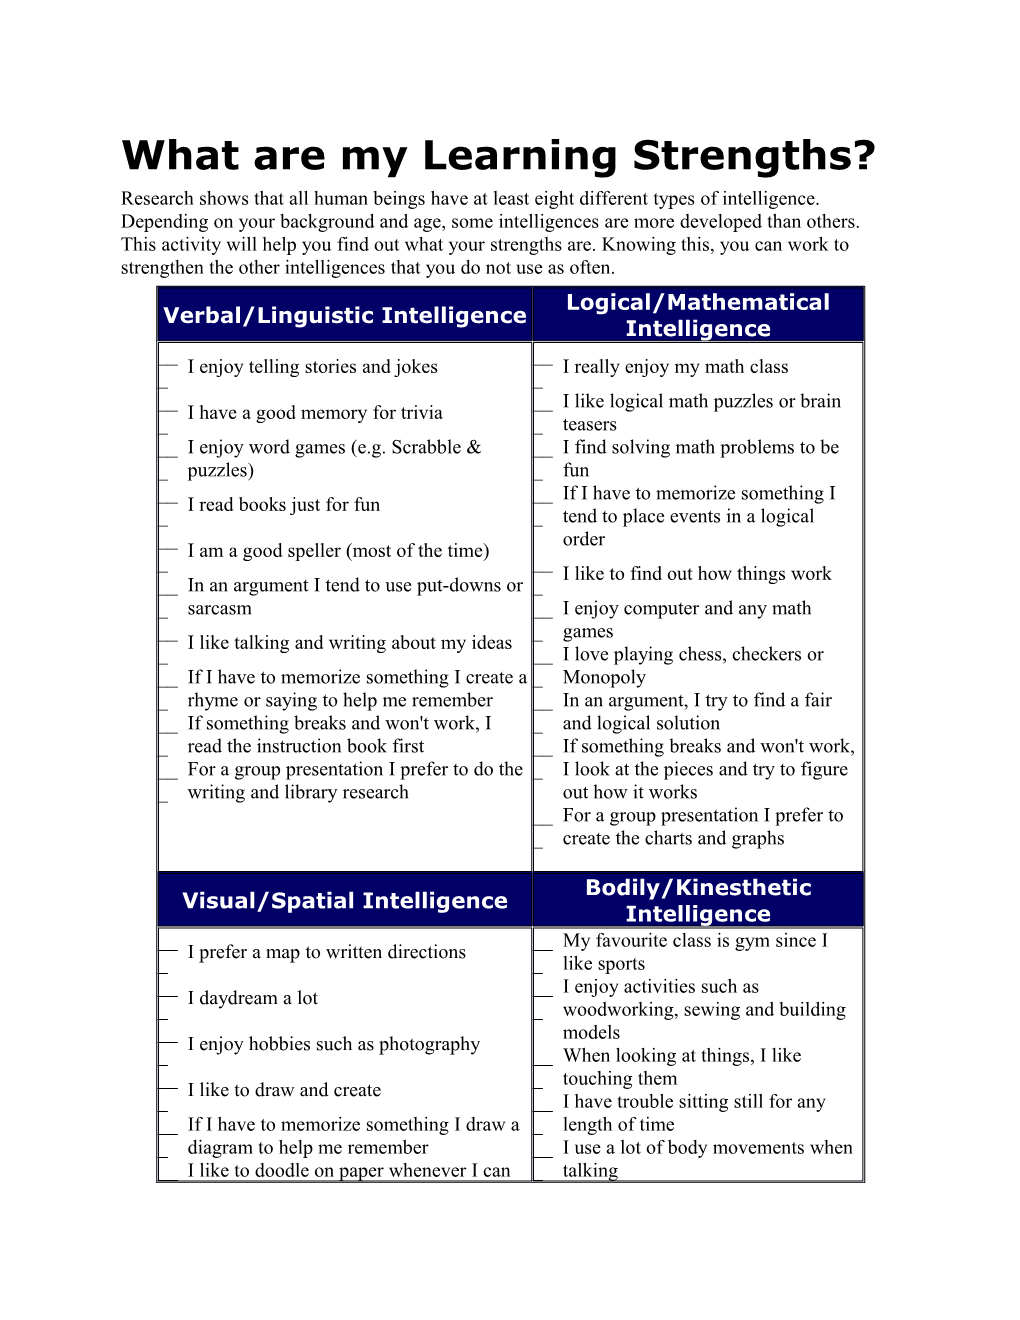 What Are My Learning Strengths?